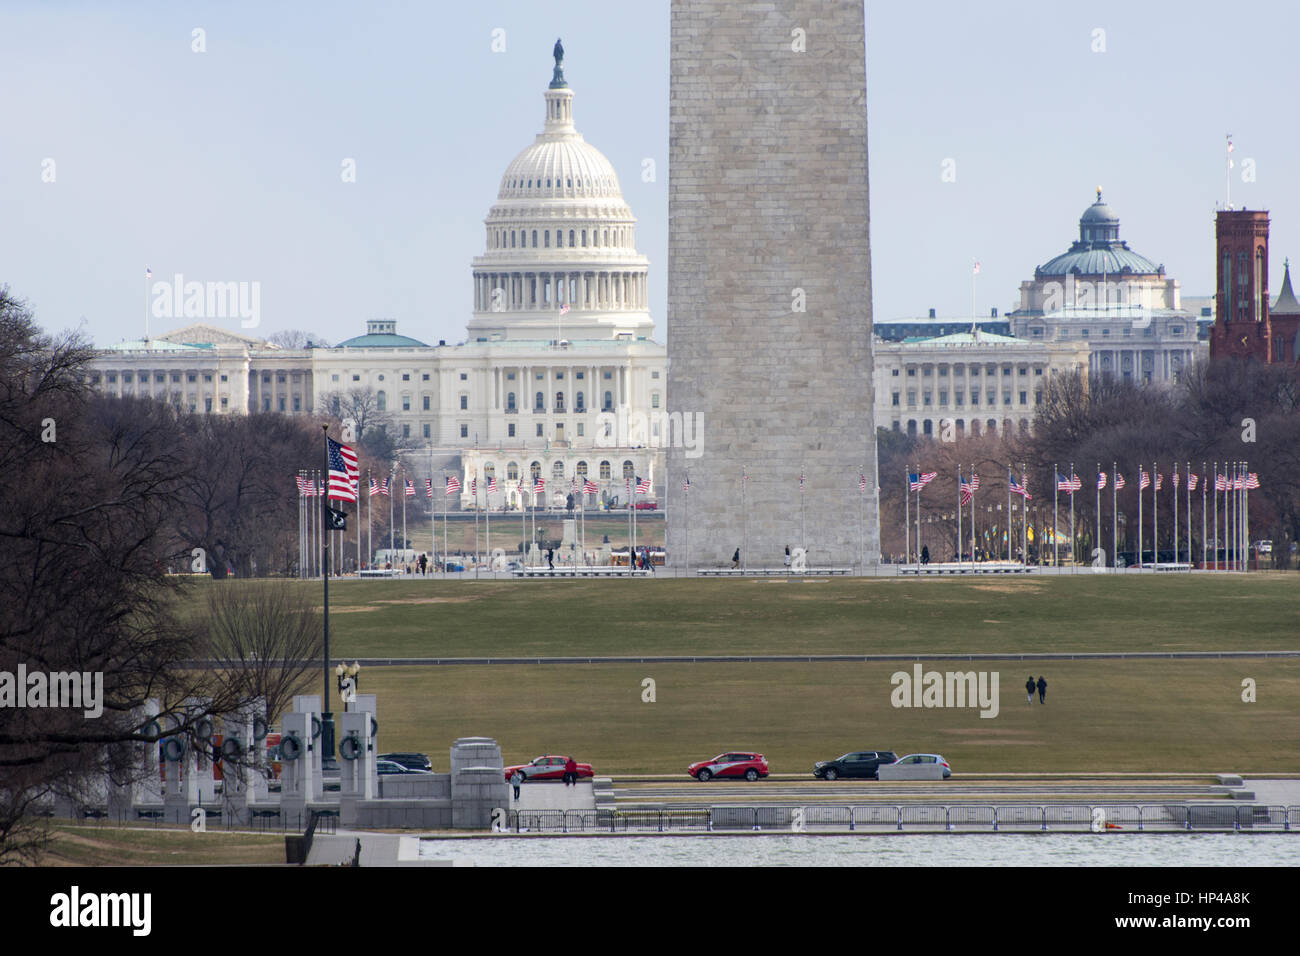 U.S. Capitol and Washington Monument seen from the Lincoln Memorial in Washington, DC. Stock Photo